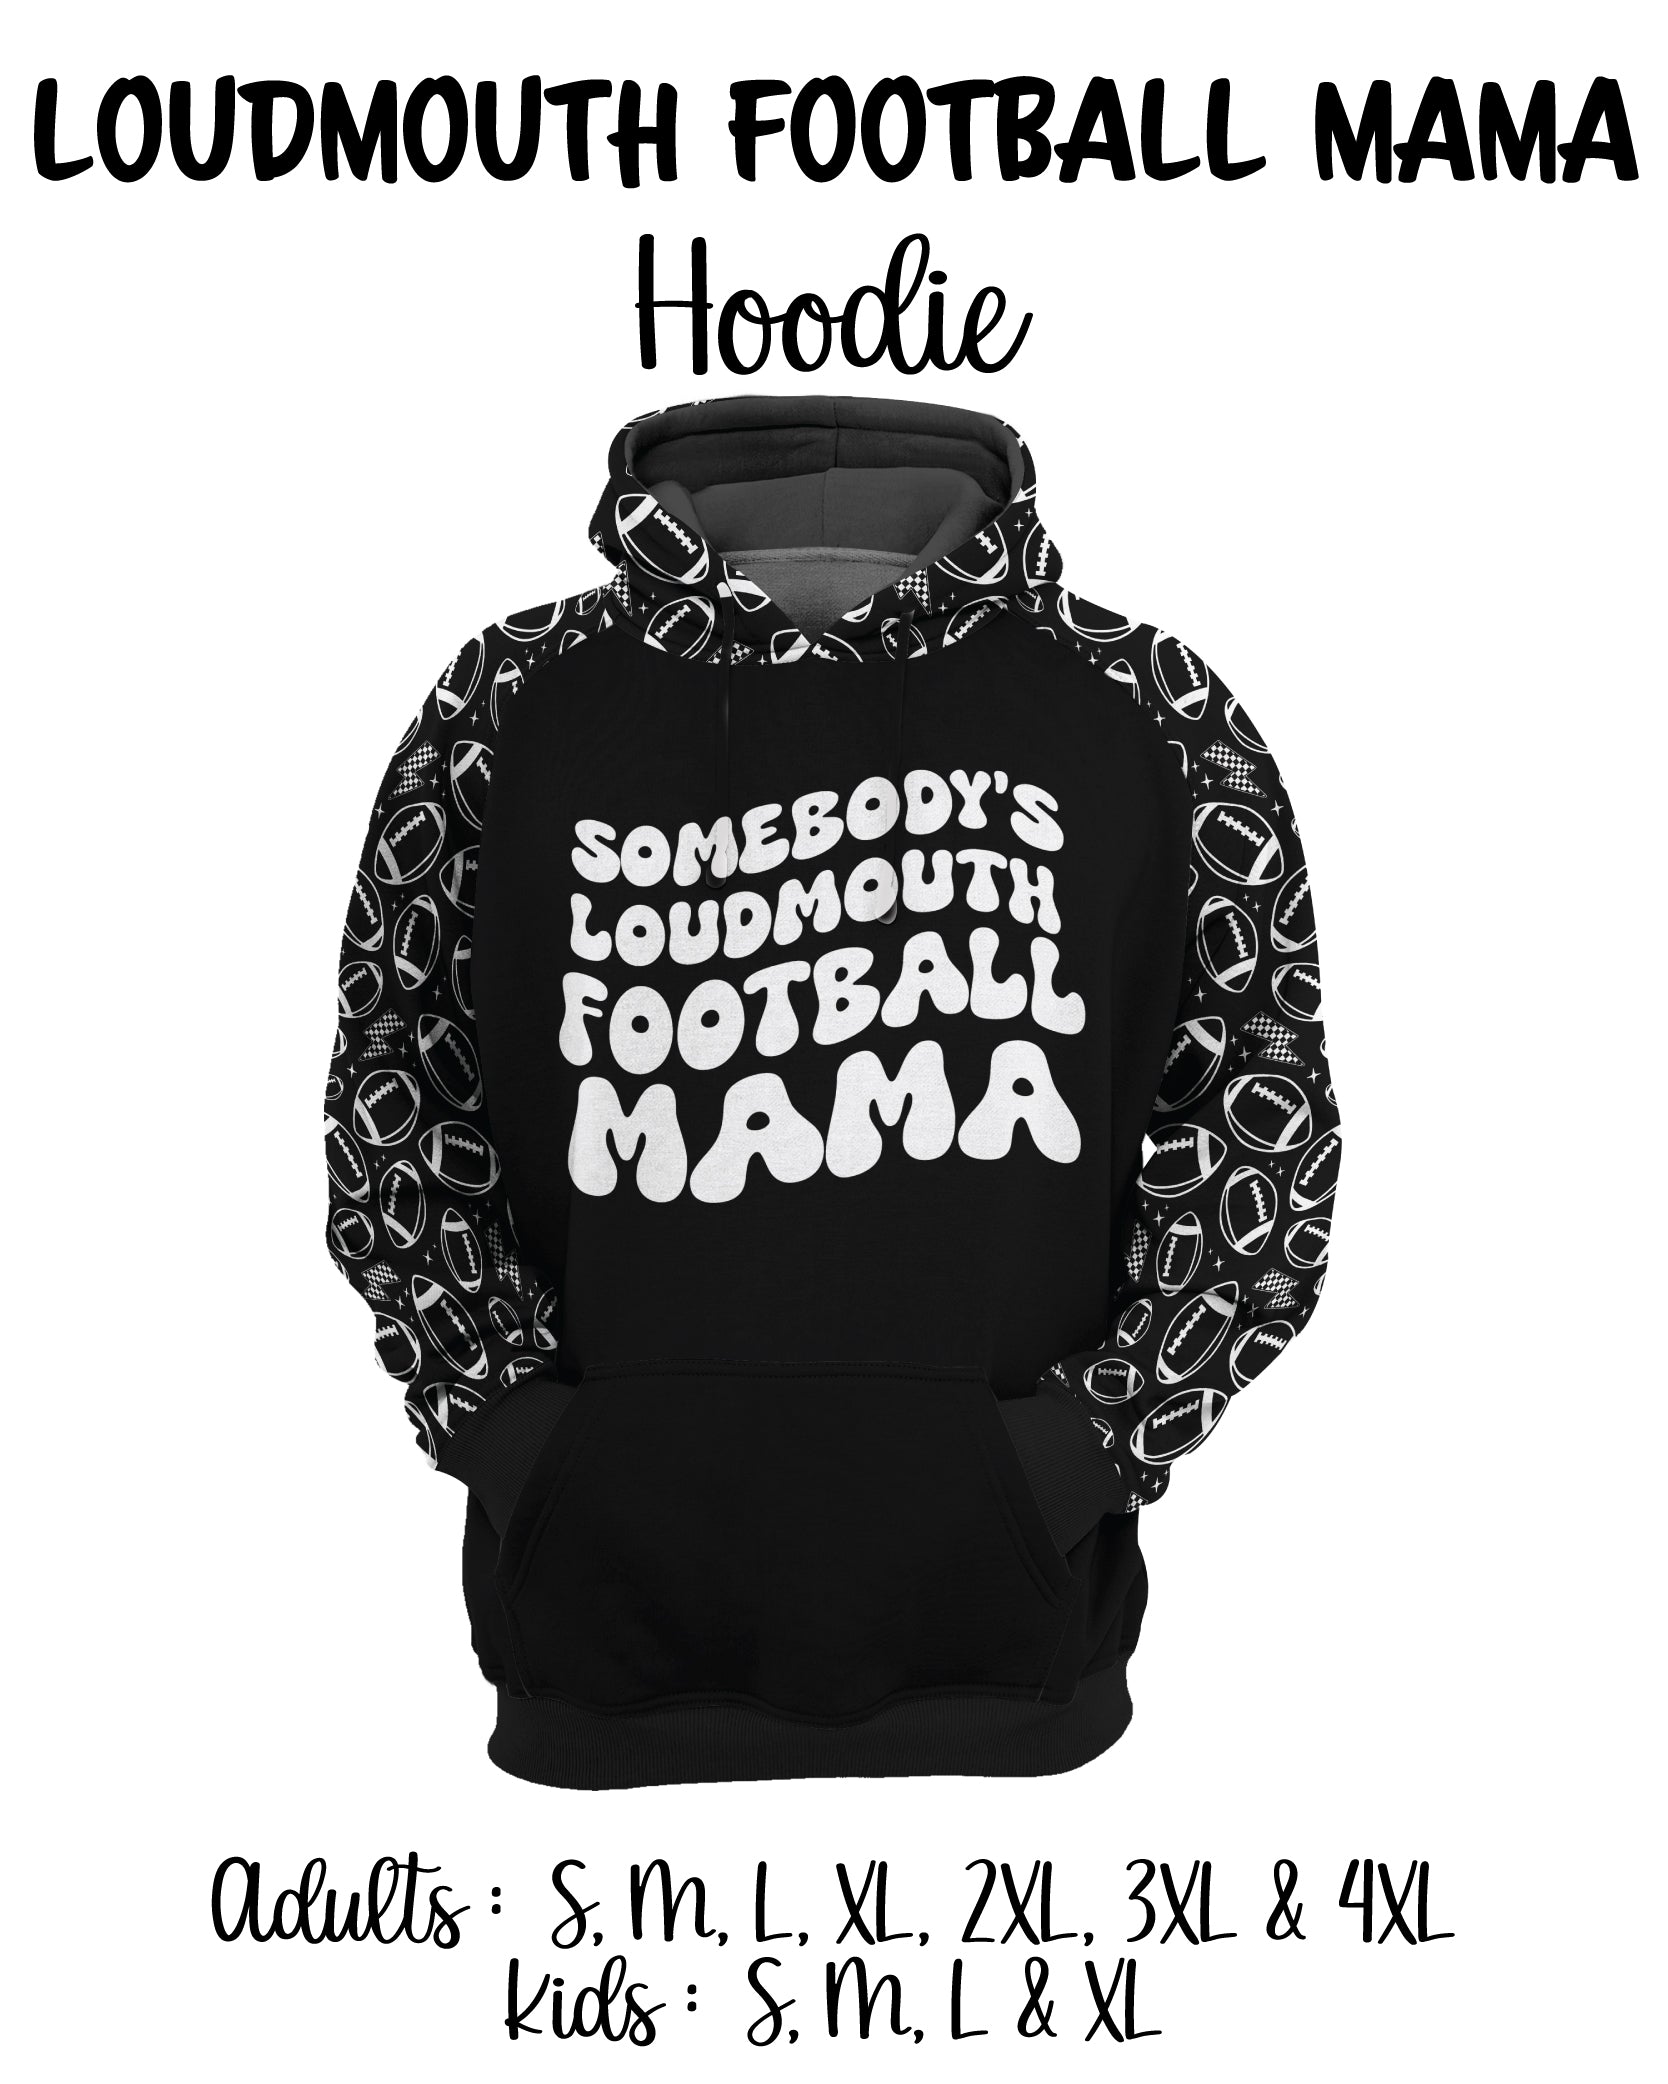 Loudmouth Football Mama Hoodie Preorder 9/24